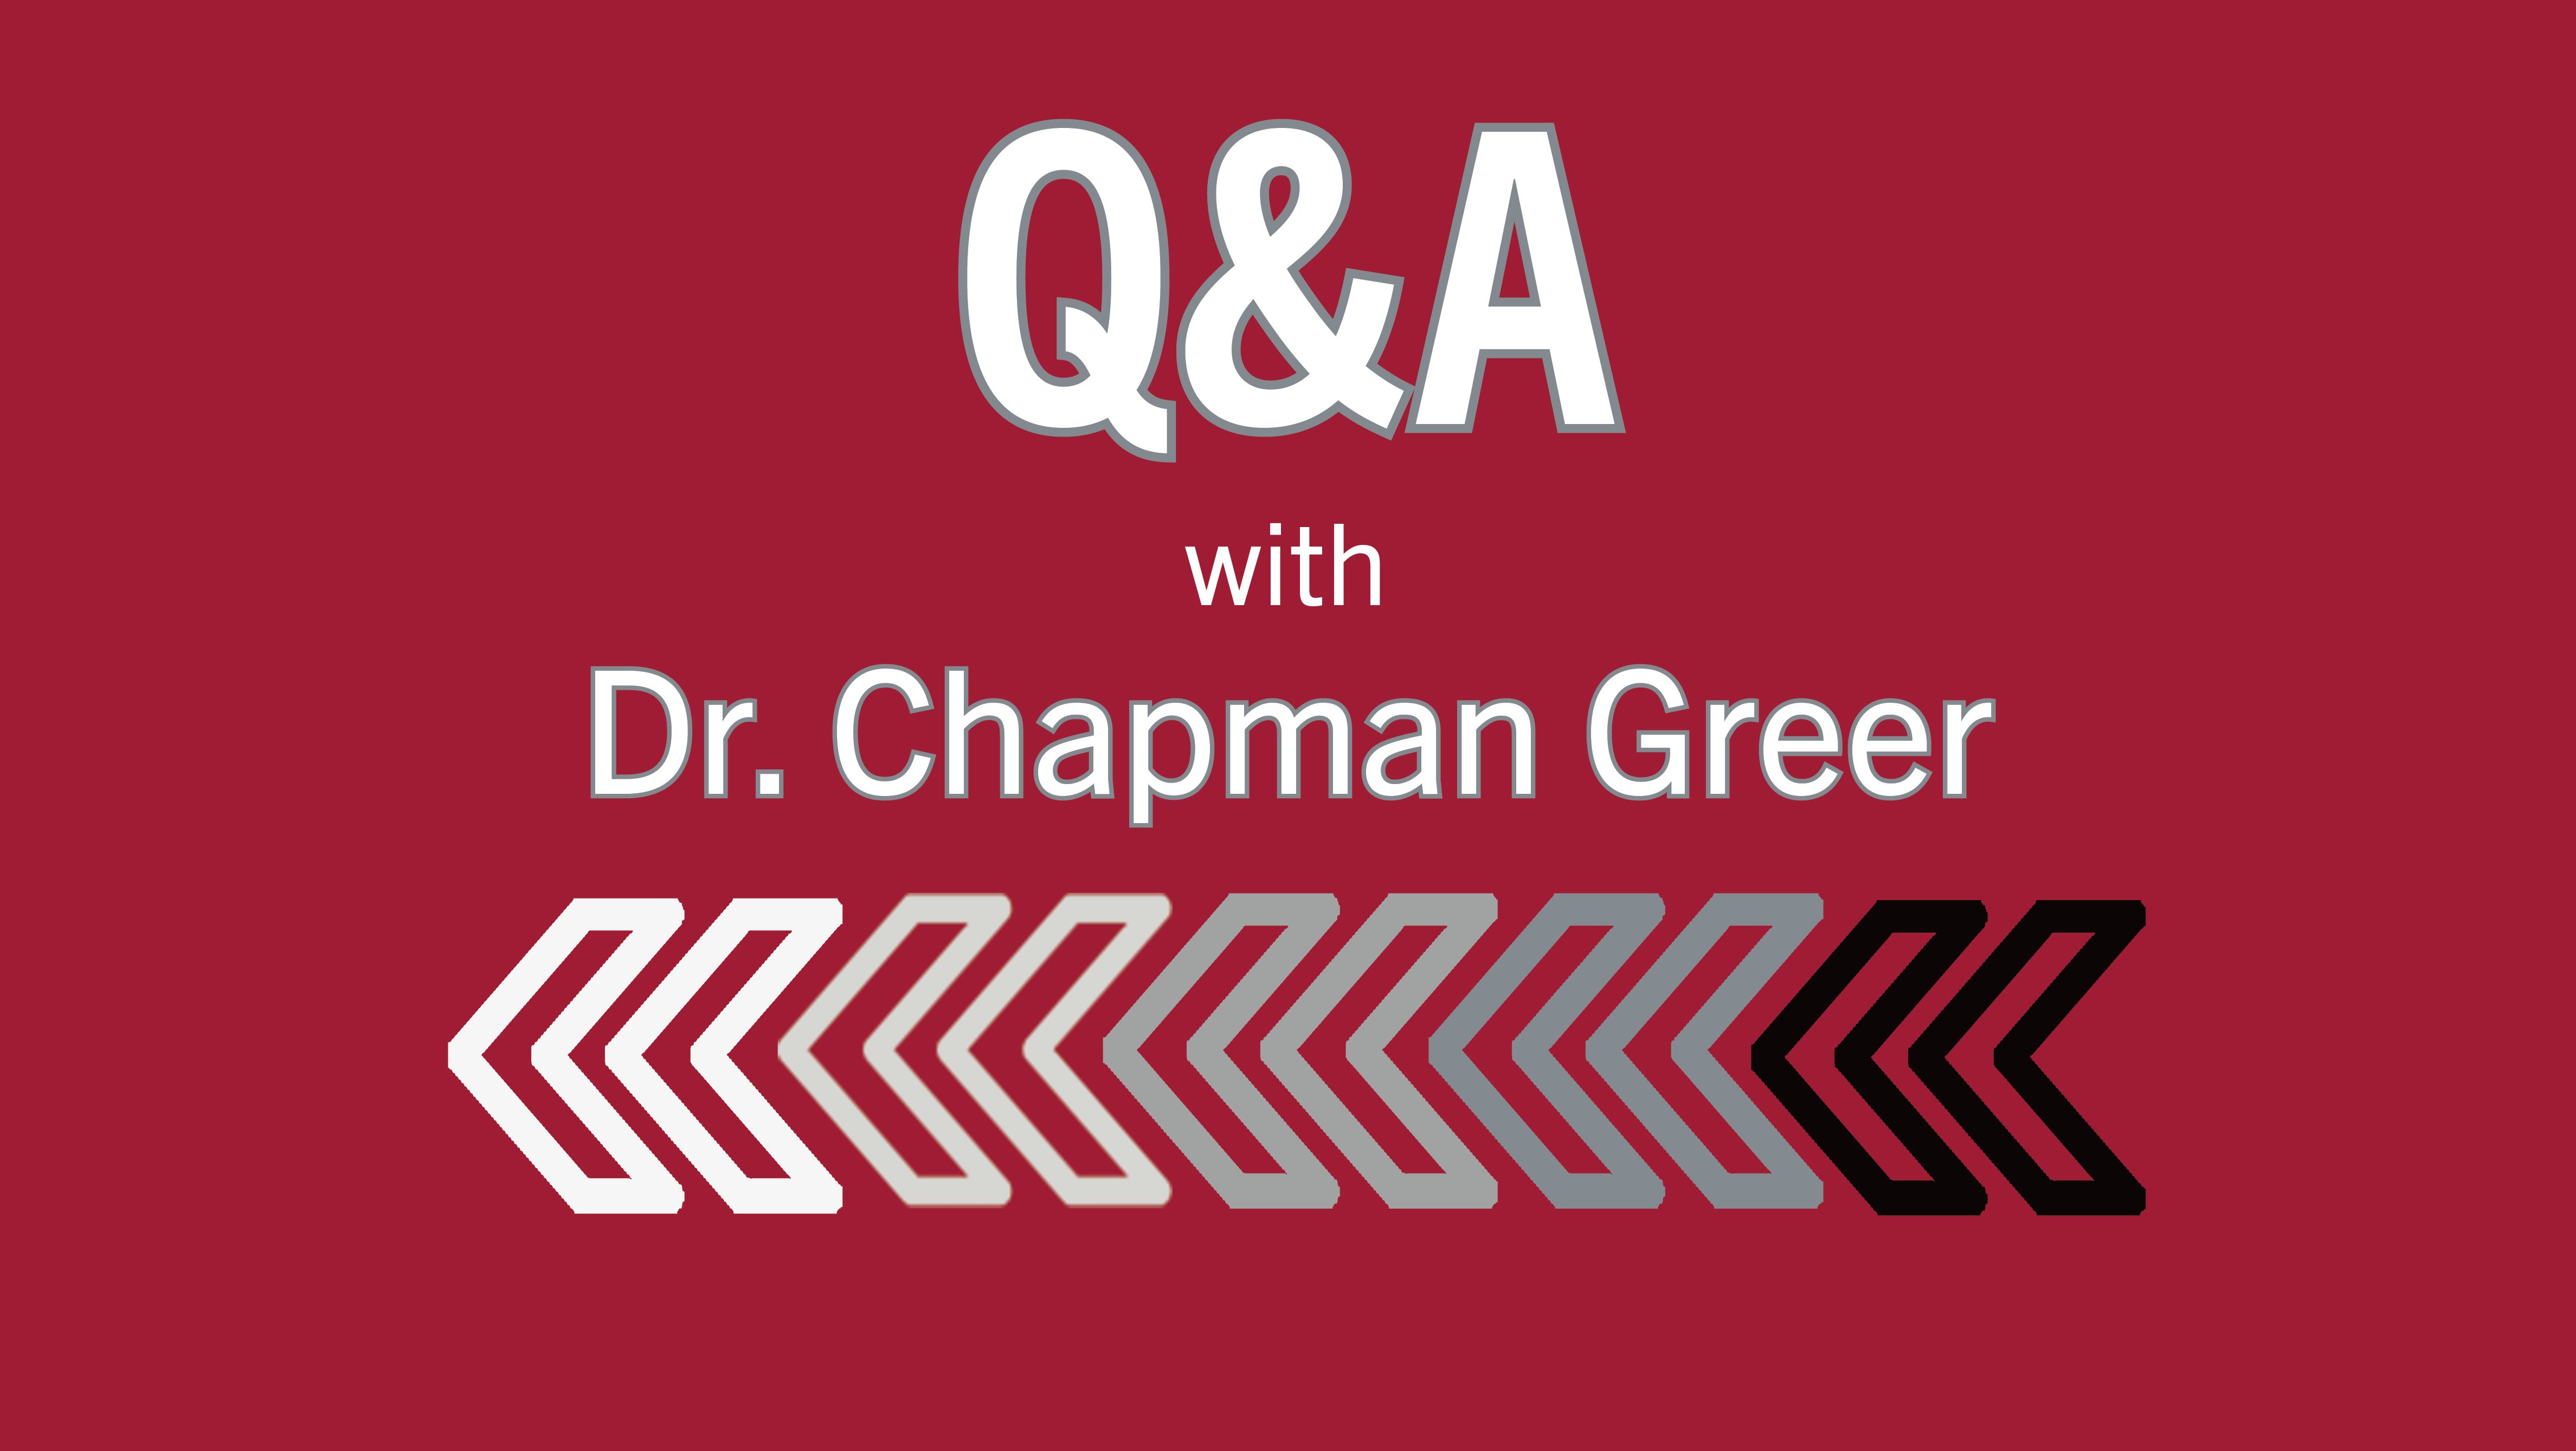 Q&A with Dr. Chapman Greer